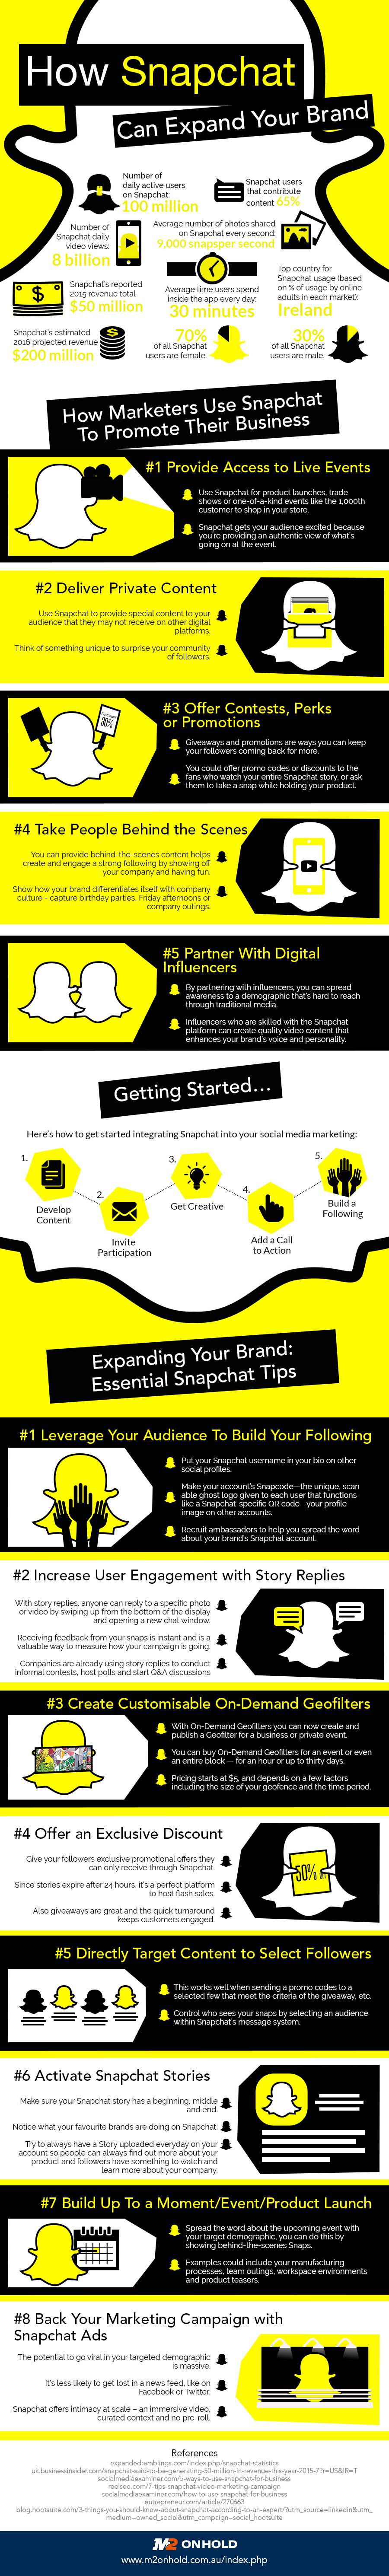 How Snapchat Can Expand Your Brand [Infographic]